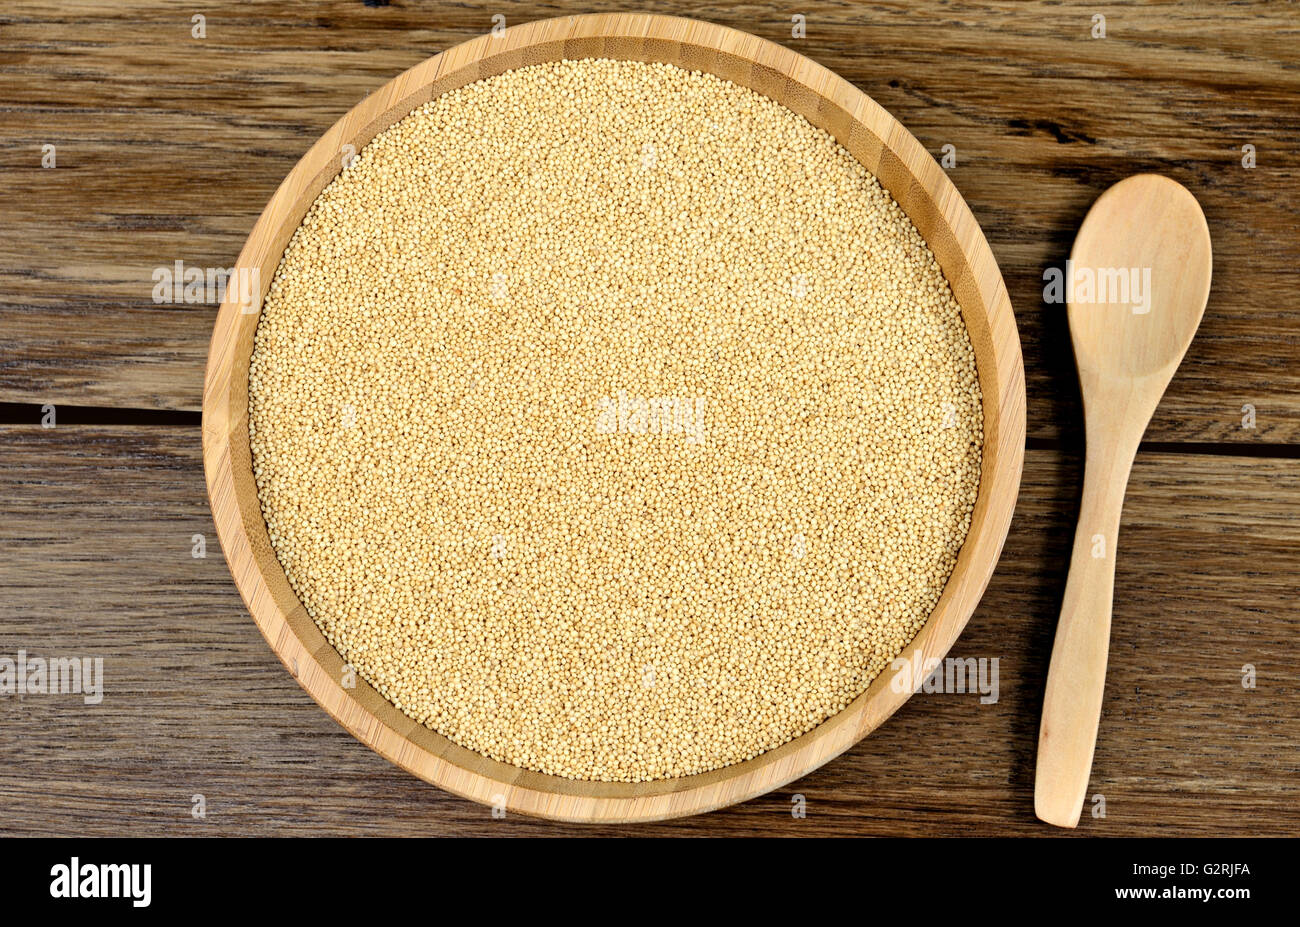 Amaranth seeds in a bamboo bowl on wooden table Stock Photo